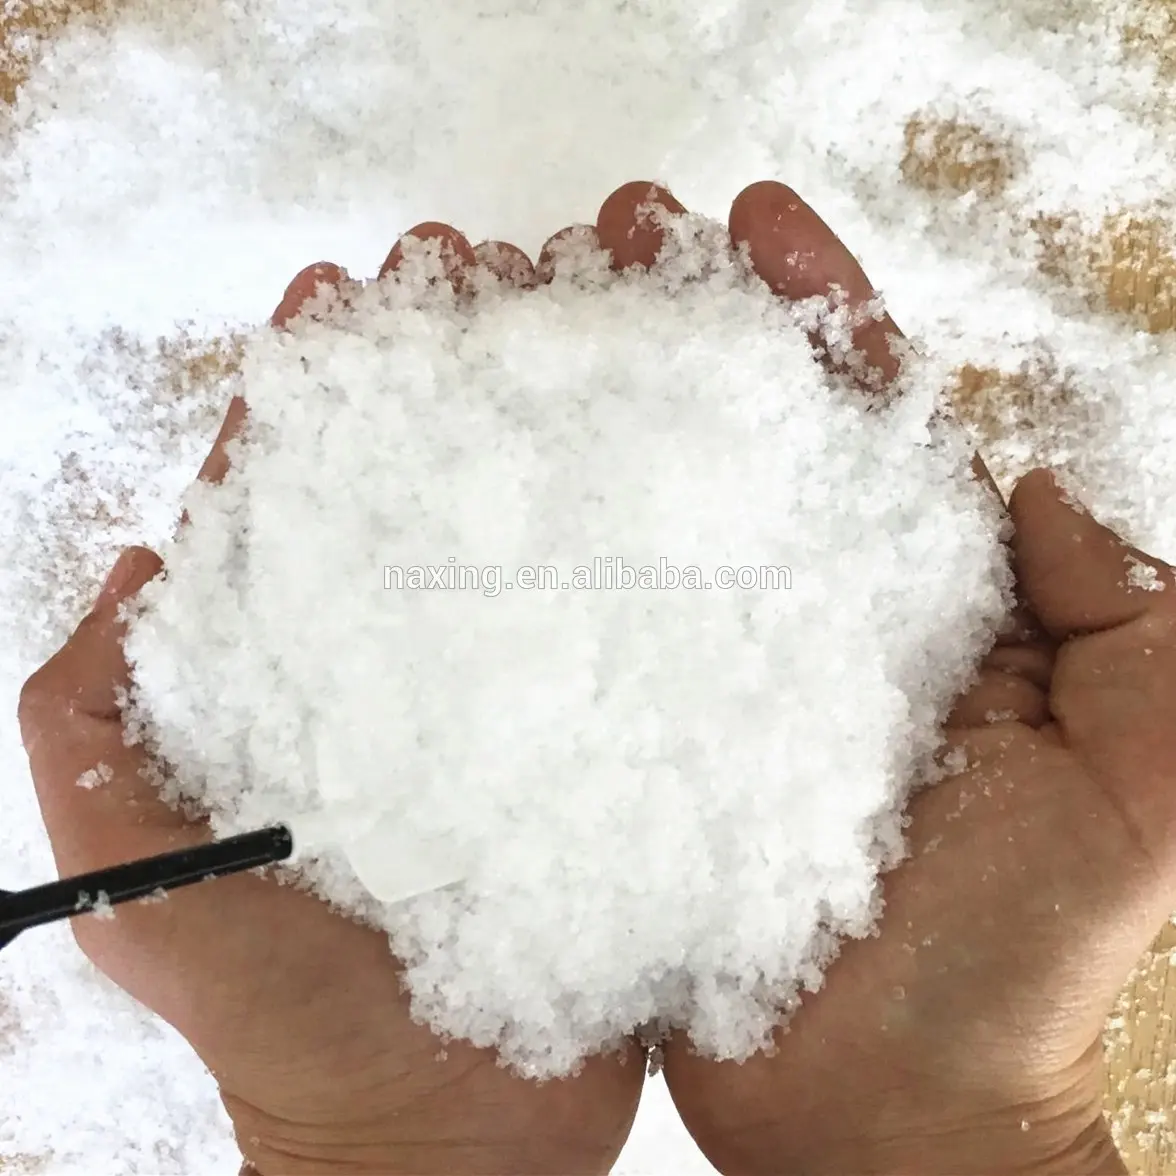 Wholesale Christmas decorations SnoWonder Instant Snow Artificial Snow Also Great for Making Cloud Slime